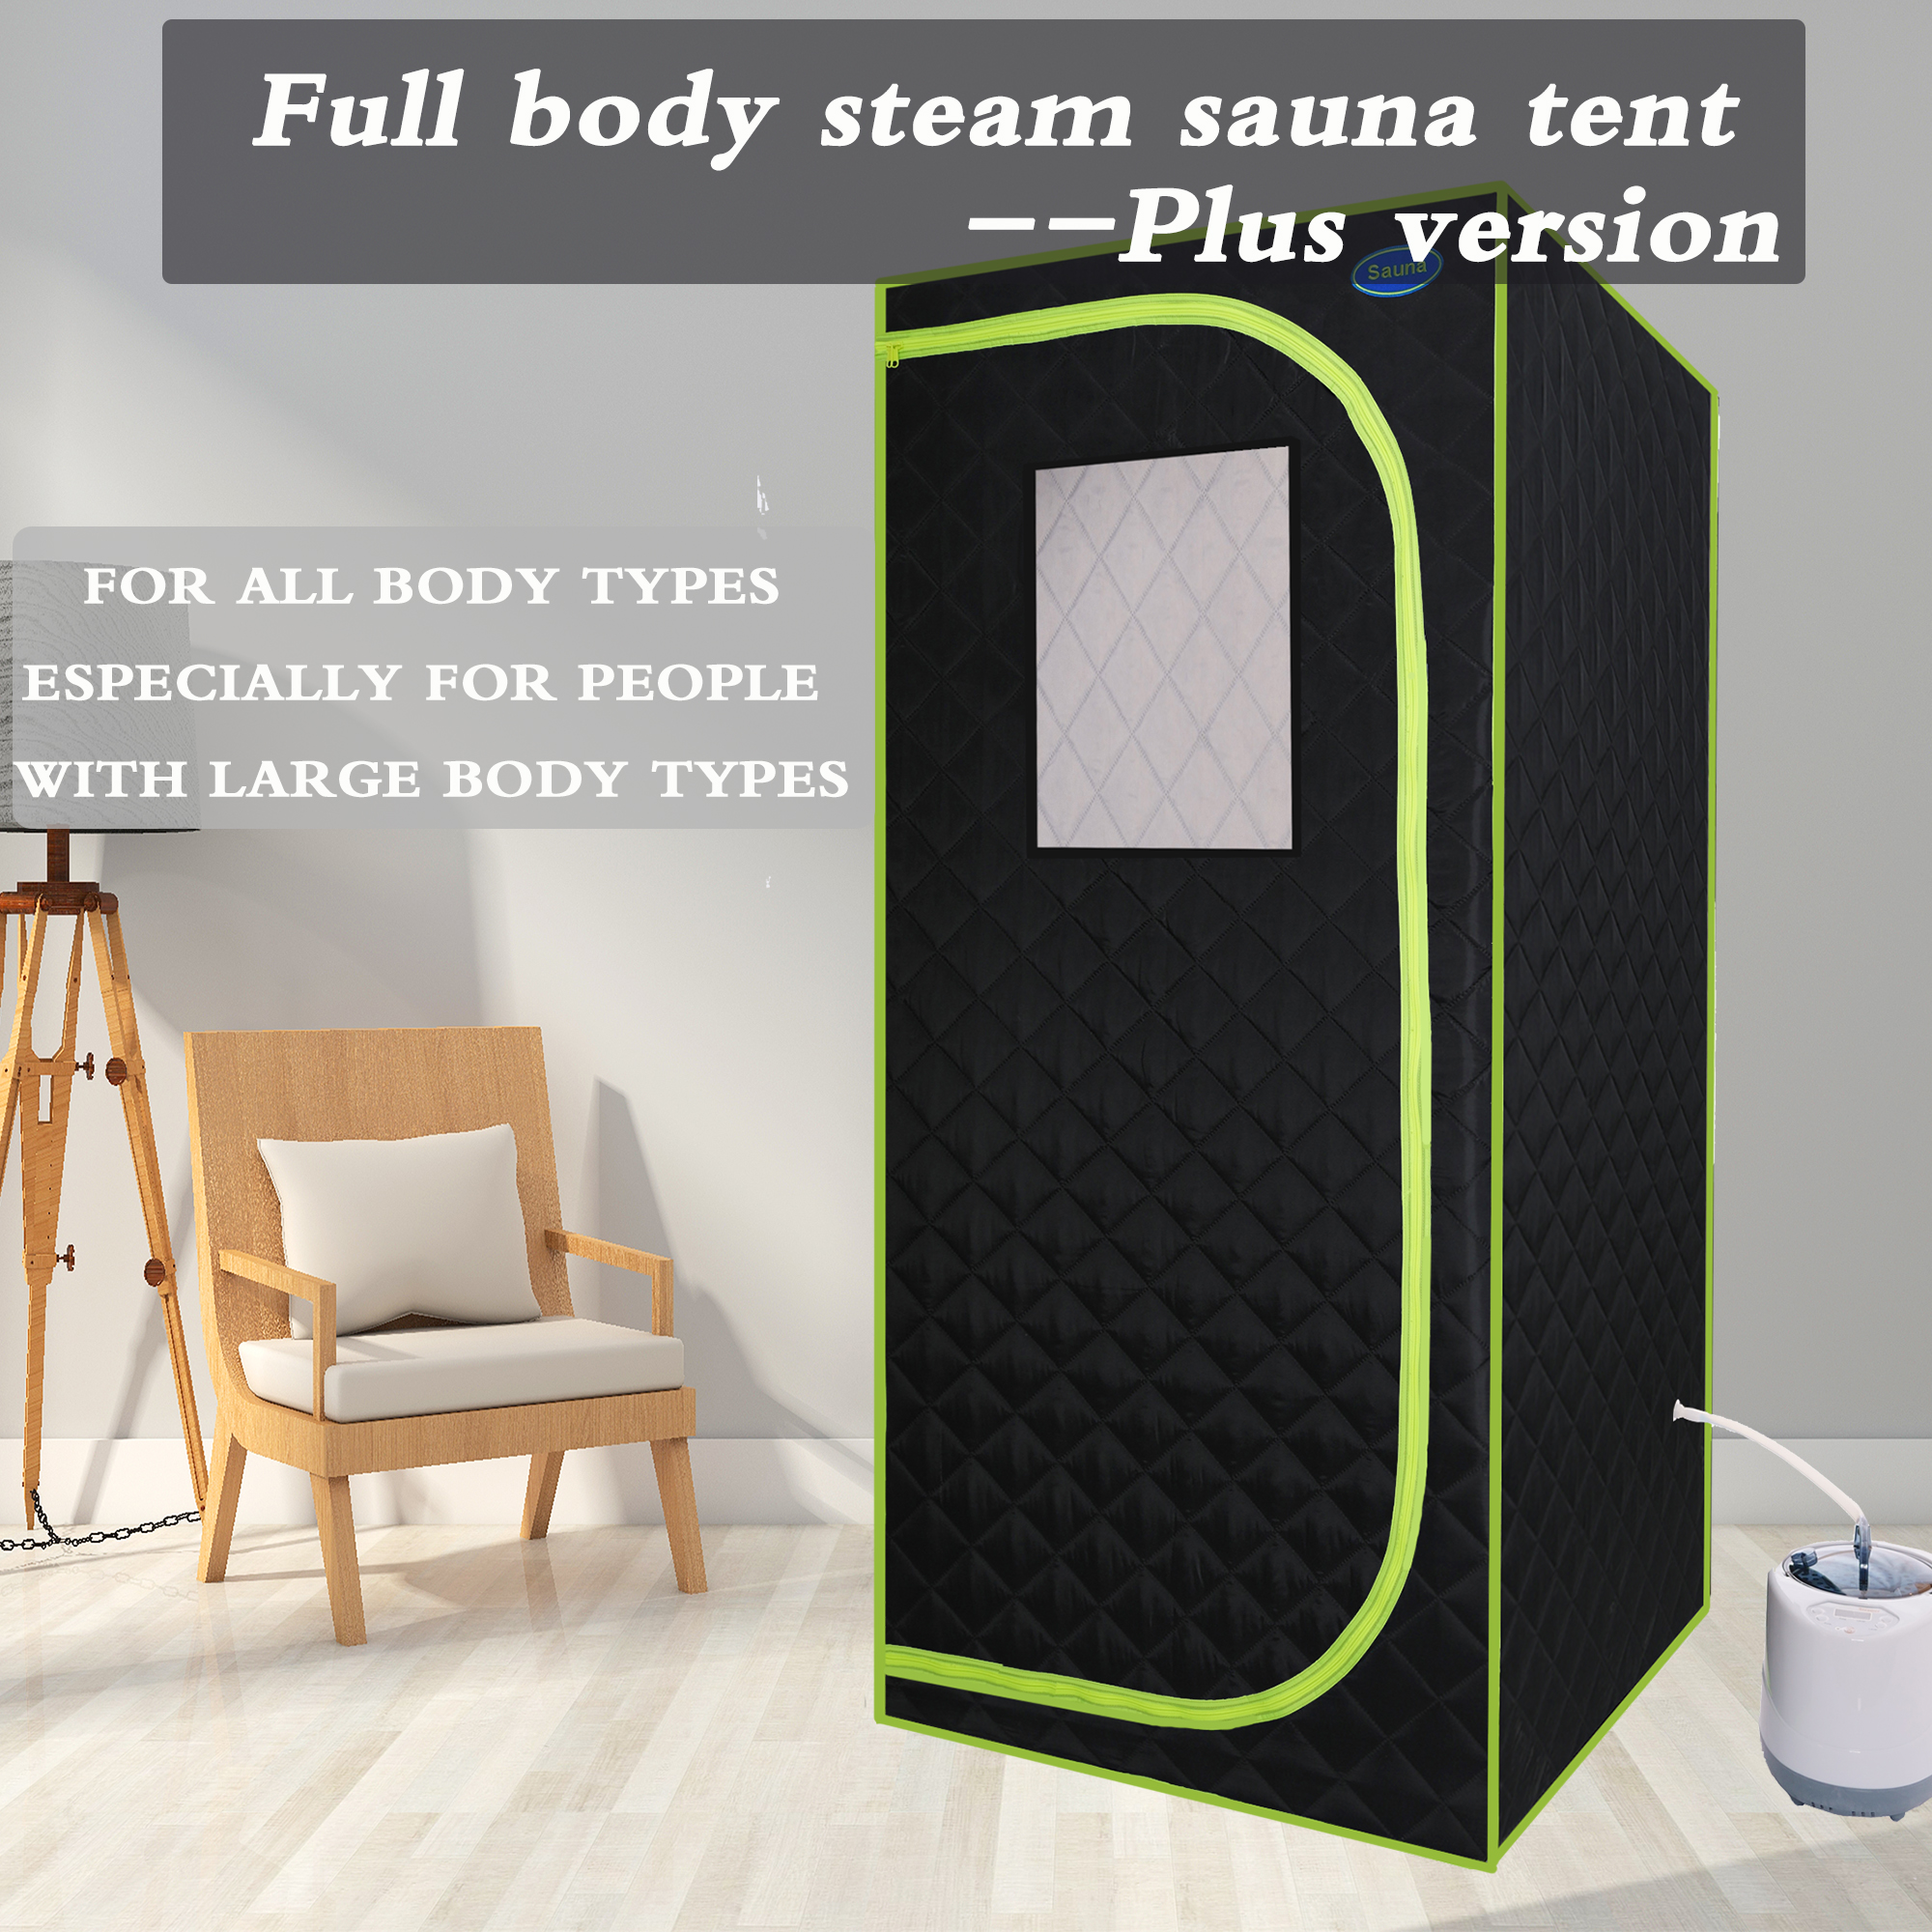 Portable Plus Type Full Size Steam Sauna tent. Spa, Detox ,Therapy and Relaxation at home.Larger Space,Stainless Steel Pipes Connector Easy to Install, with FCC Certification--Black(Green binding)-CASAINC